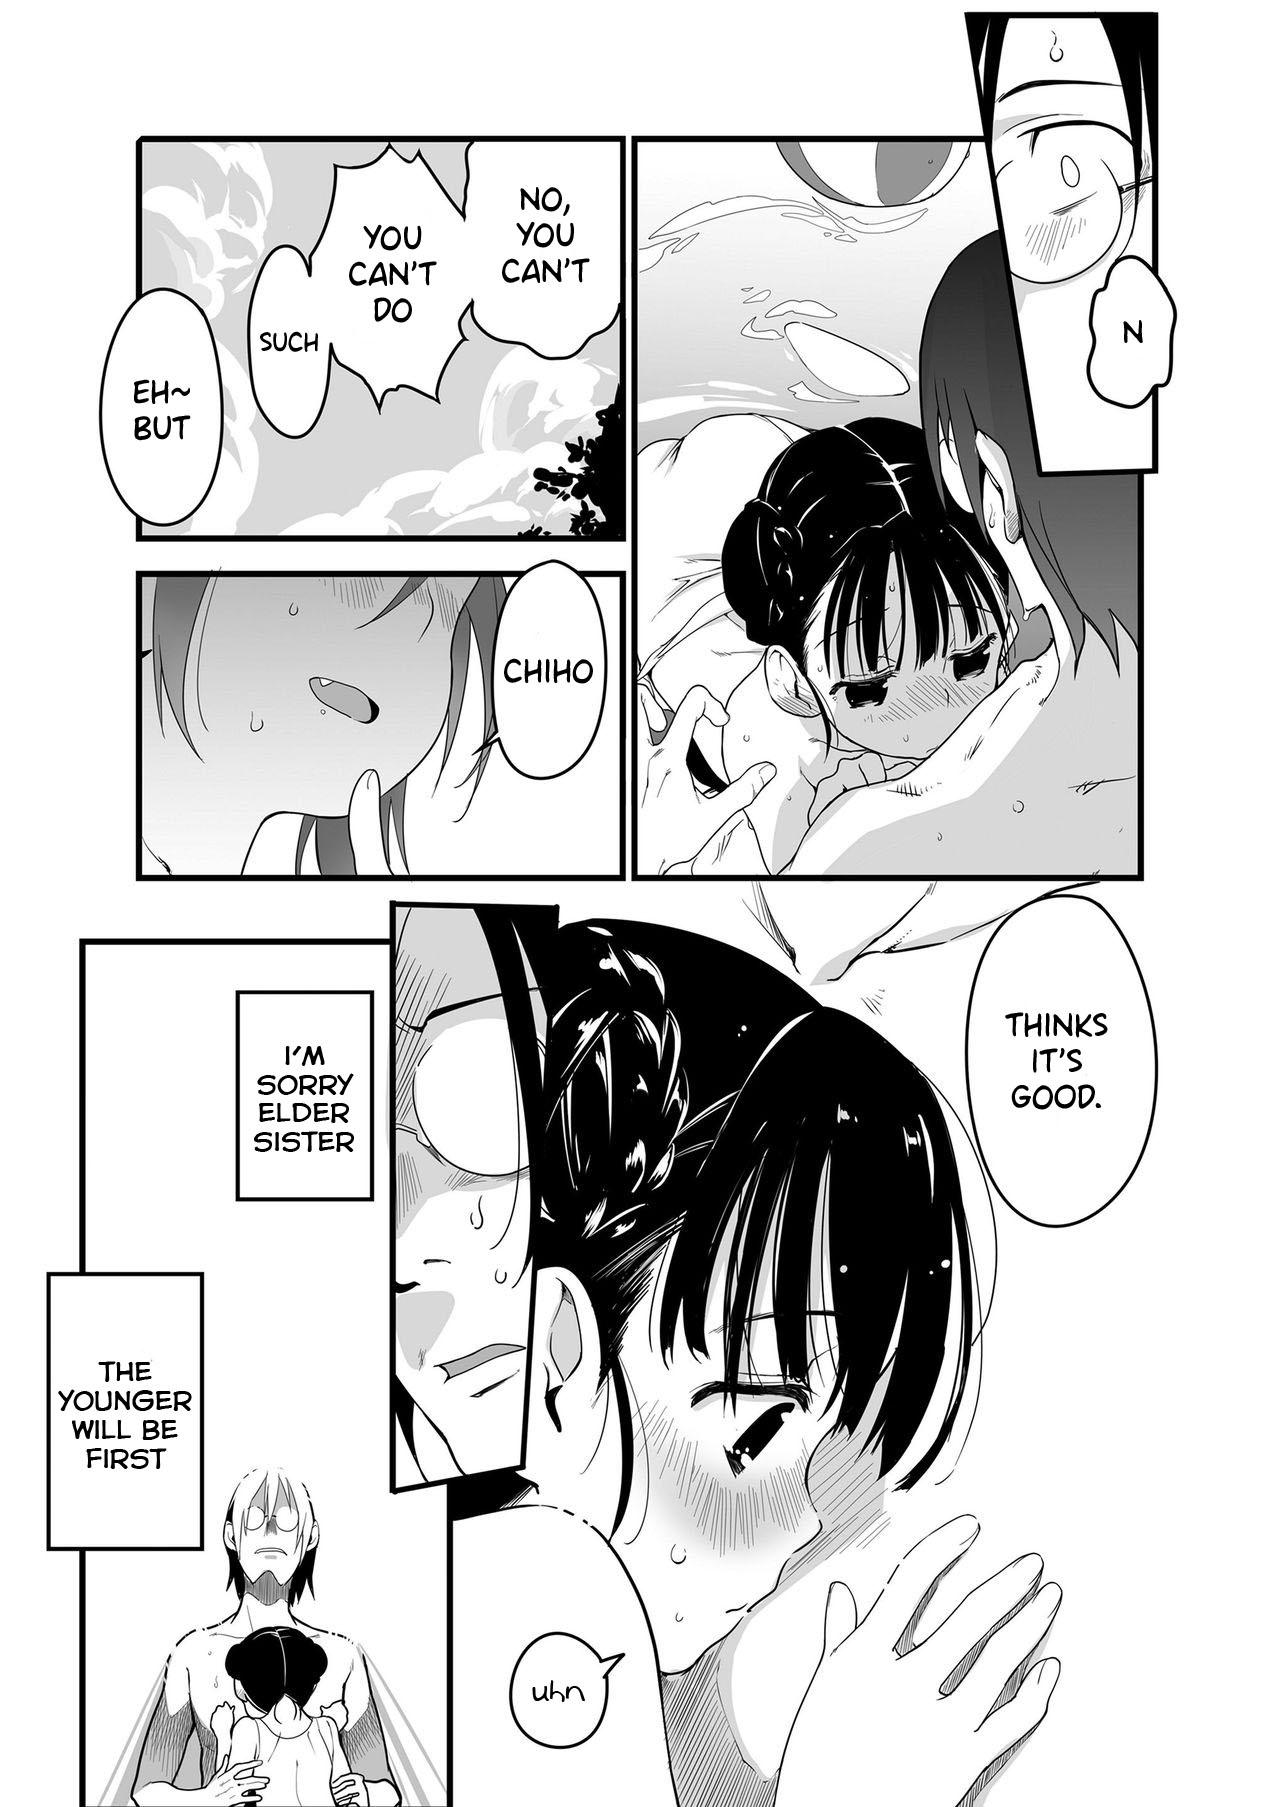 Orgasm Uchiage Hanabi, Ane to Miruka? Imouto to Miruka? | Fireworks, Should we see it with the elder sister or the younger sister? Highheels - Page 9